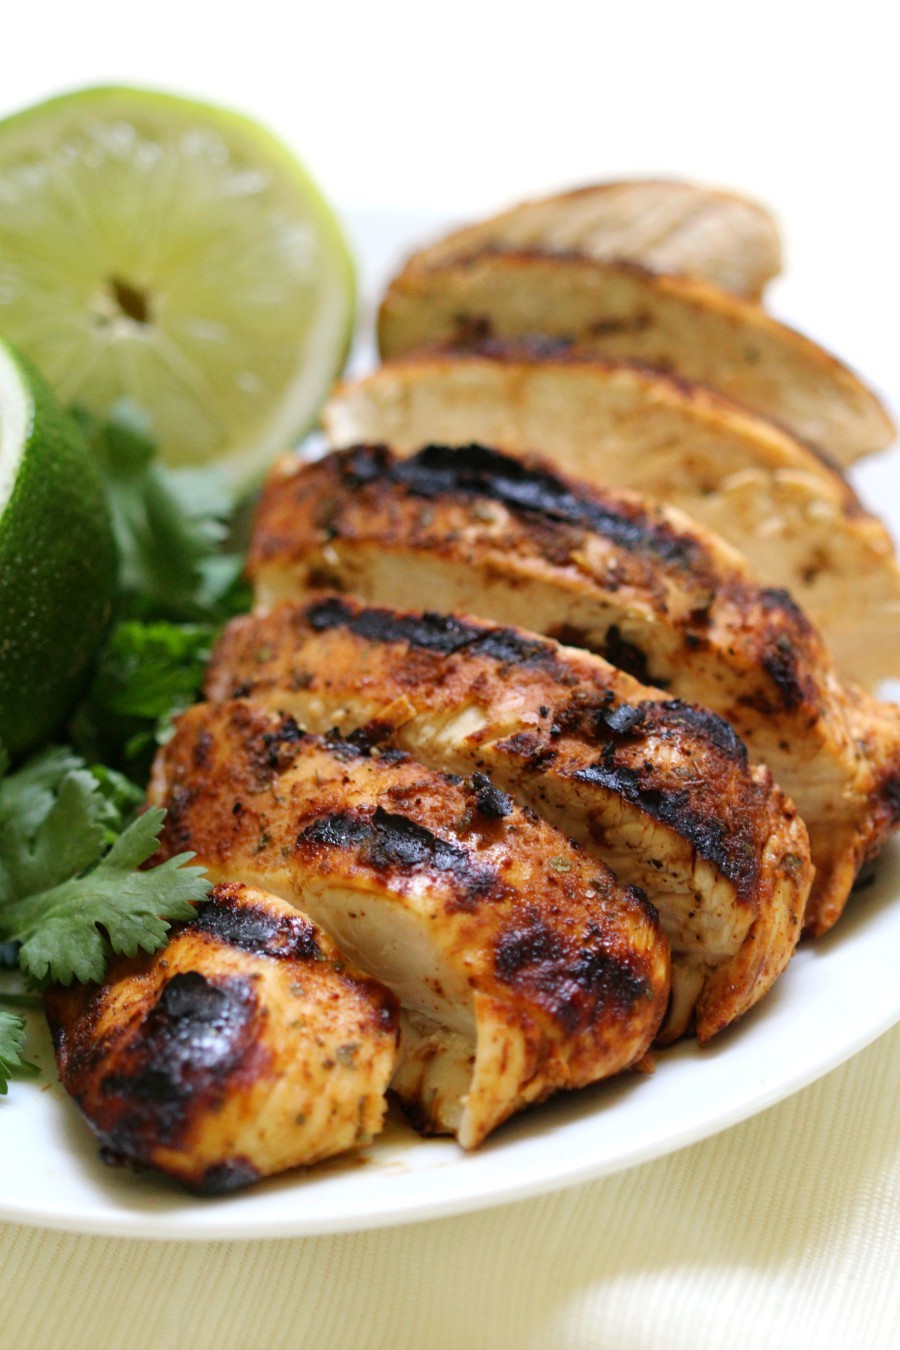 Grilled Chili Lime Chicken ( Gluten-Free, Paleo, Allergy-Free) | Strength and Sunshine @RebeccaGF666 You'll want this spicy and zesty recipe on the grill asap! Grilled Chili Lime Chicken that's a delicious healthy entree for your next bqq or cookout! It's gluten-free, paleo, and allergy-free; perfect for pleasing the crowd and awakening the taste buds!